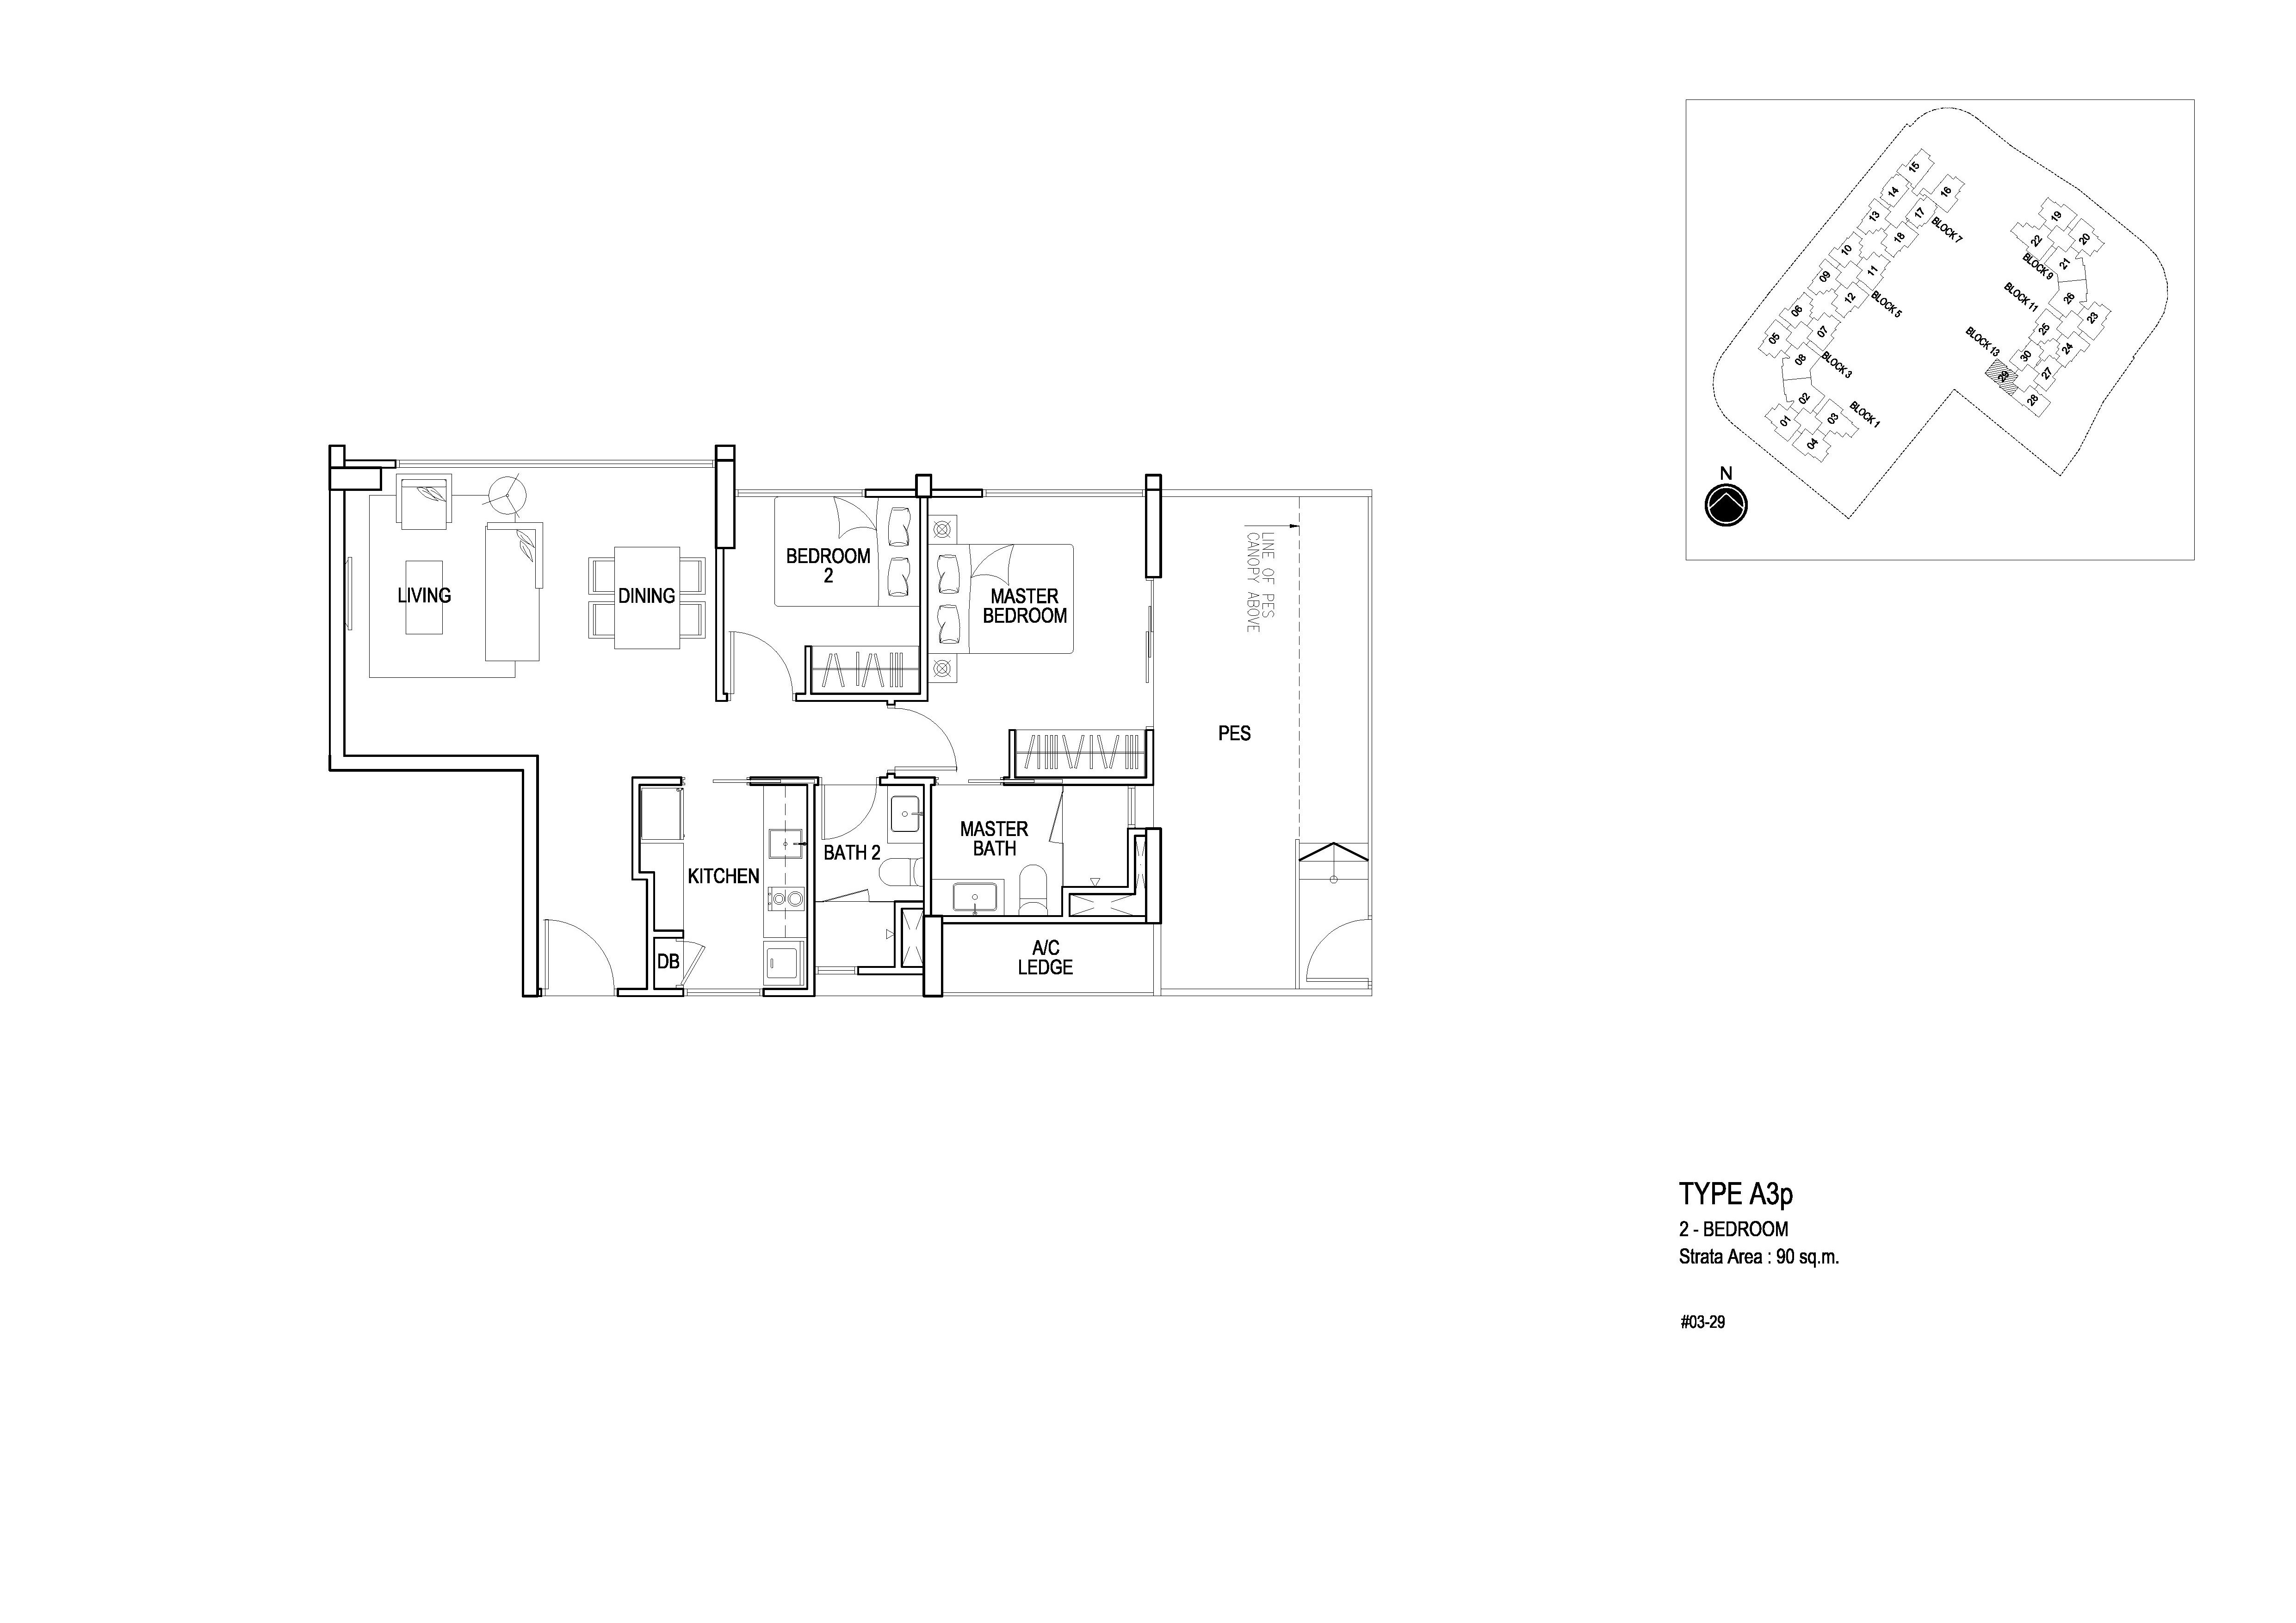 Flo Residence 2 Bedroom PES Floor Plans Type A3p